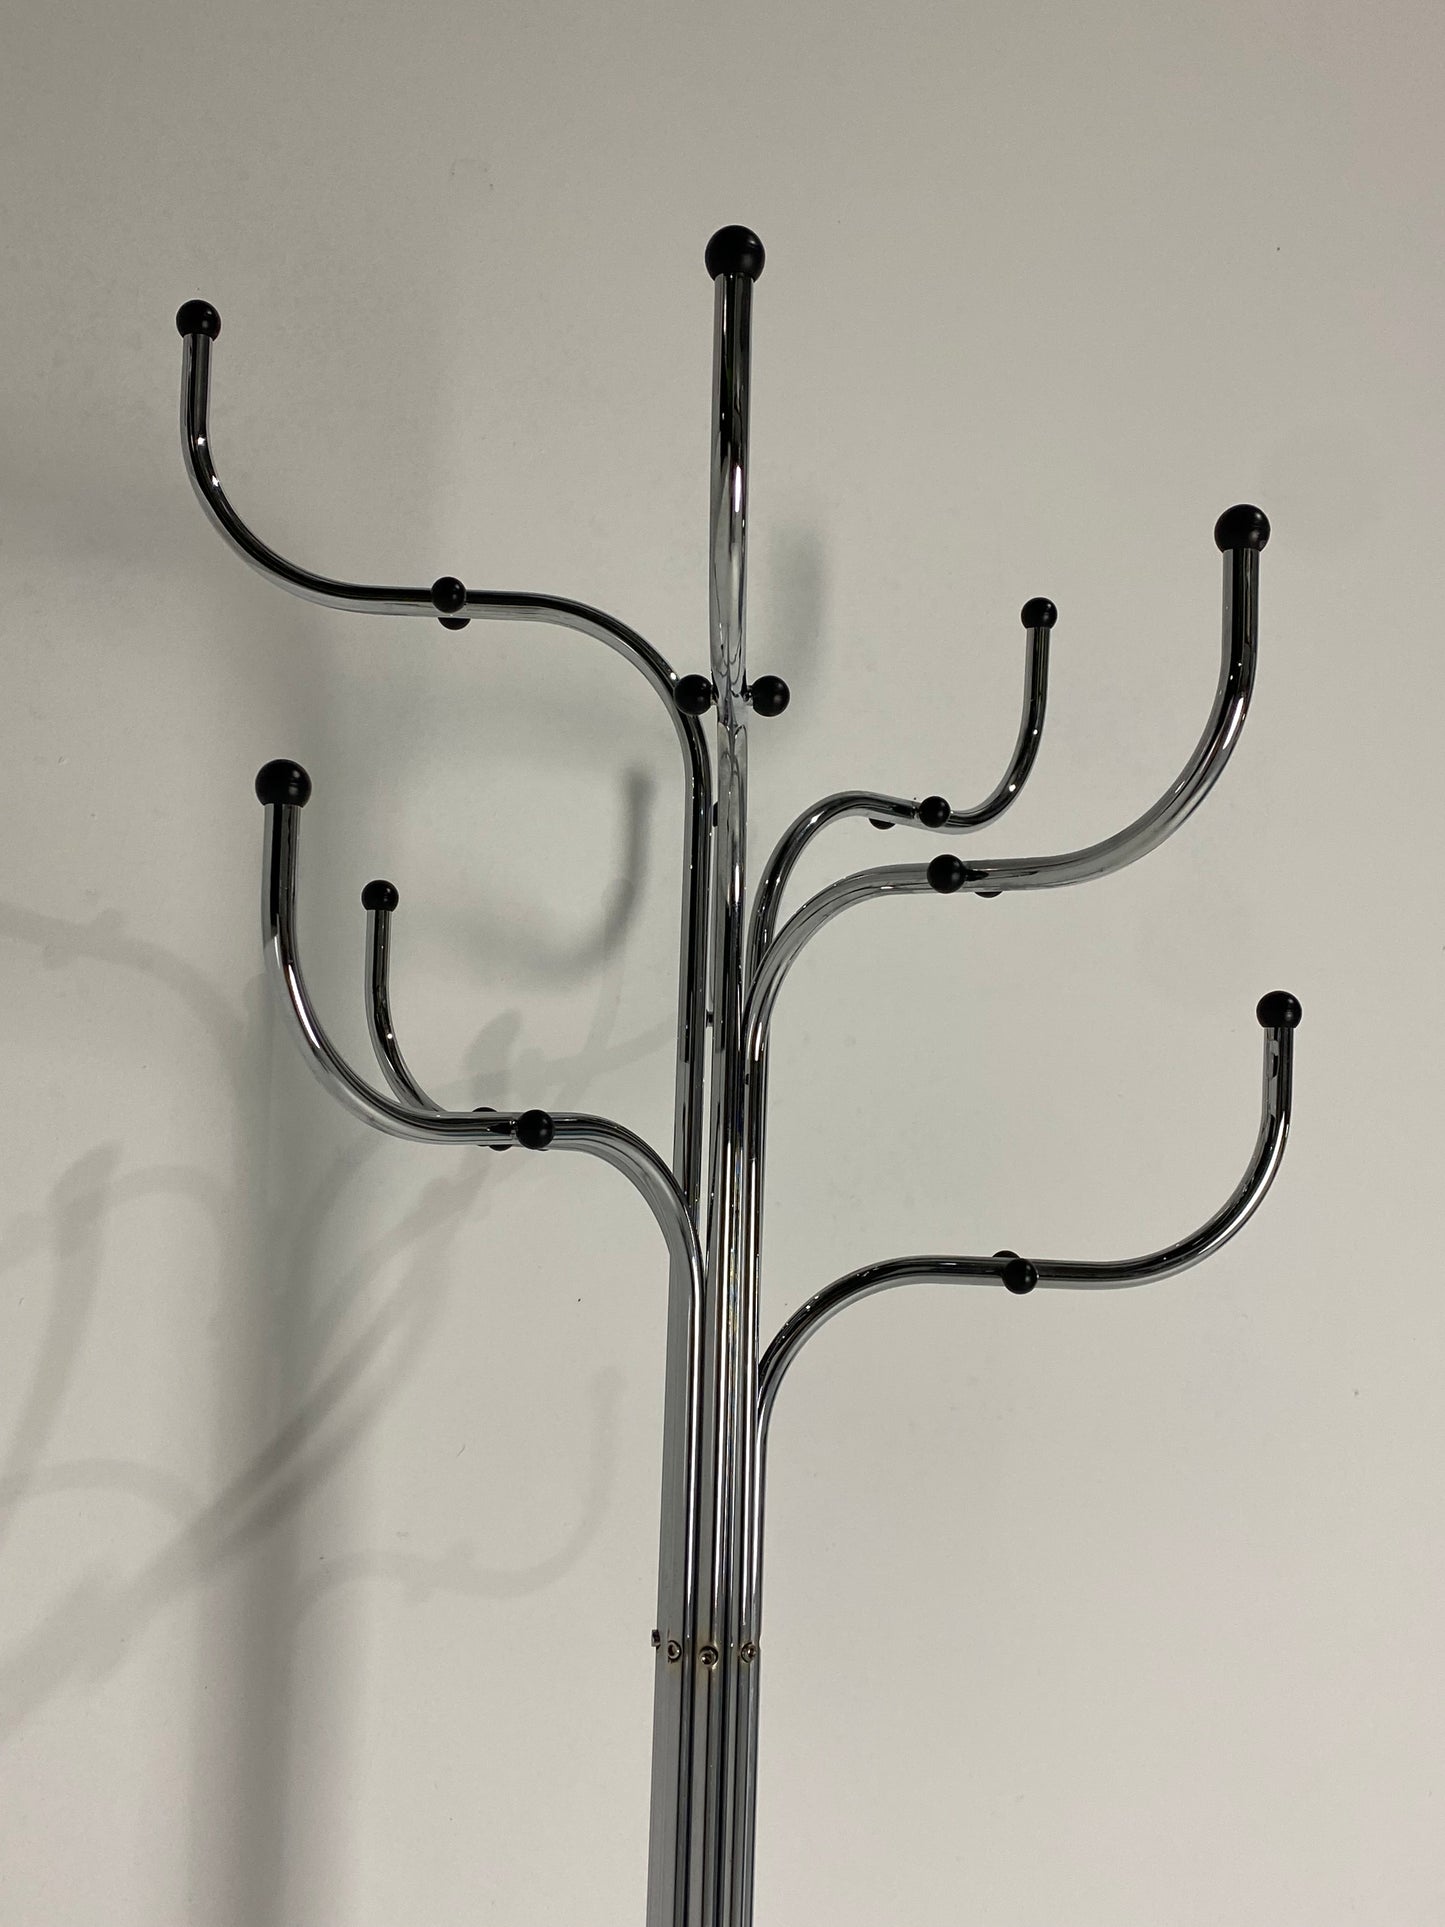 - Chrome 'Coat Tree' Coat Stand by Sidse Werner for Fritz Hansen.